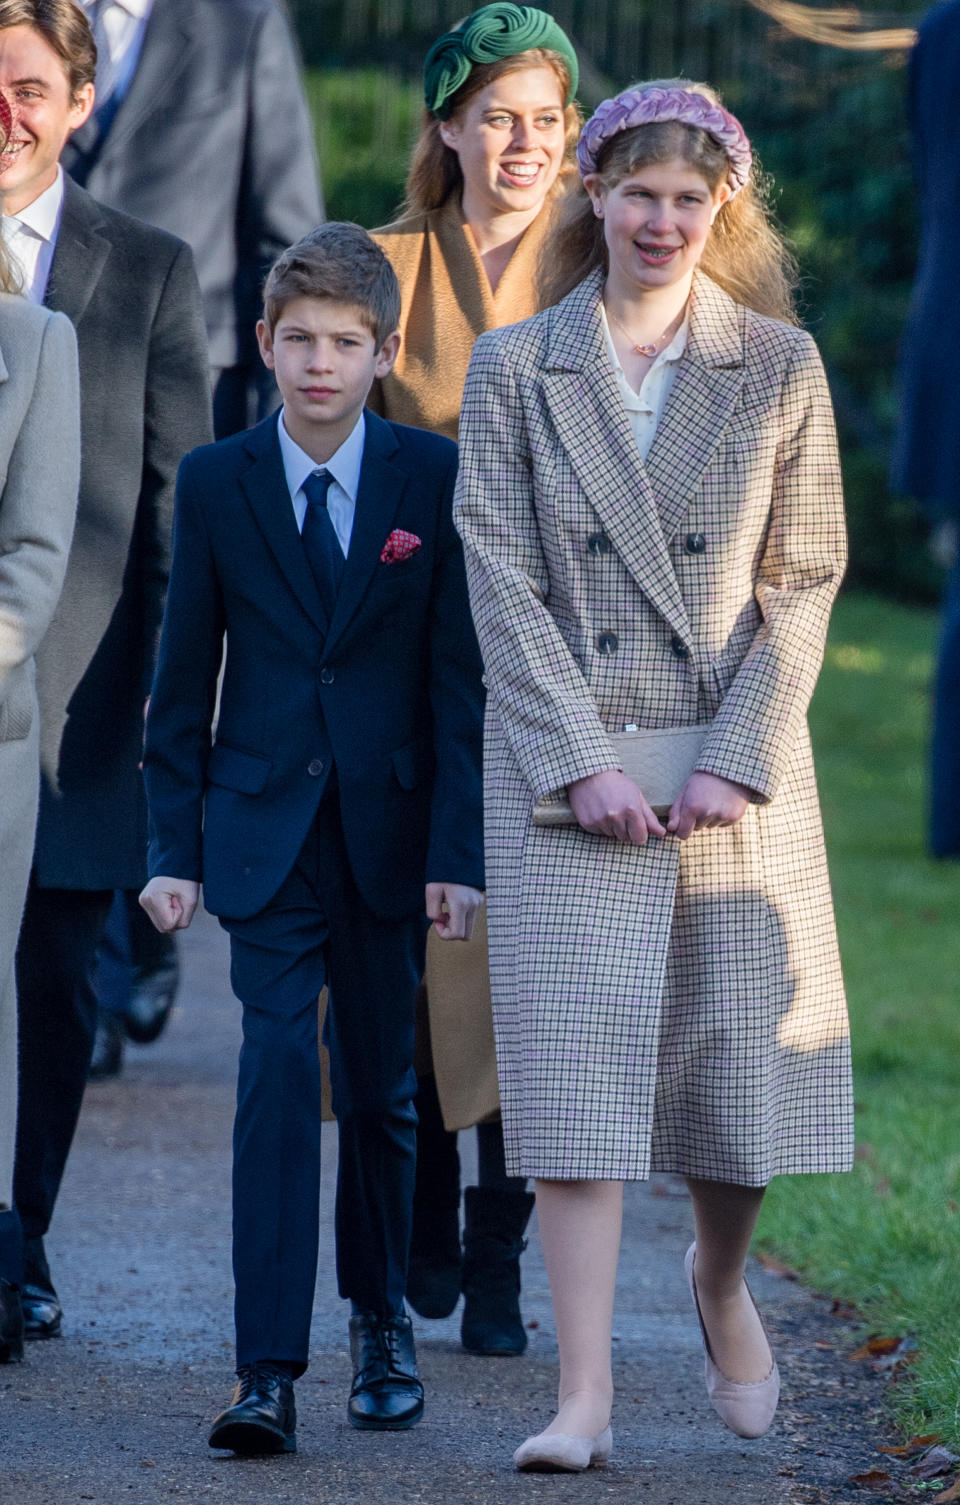 KING'S LYNN, ENGLAND - DECEMBER 25: James Viscount Severn and Lady Louise Windsor  attend the Christmas Day Church service at Church of St Mary Magdalene on the Sandringham estate on December 25, 2019 in King's Lynn, United Kingdom. (Photo by Pool/Samir Hussein/WireImage)